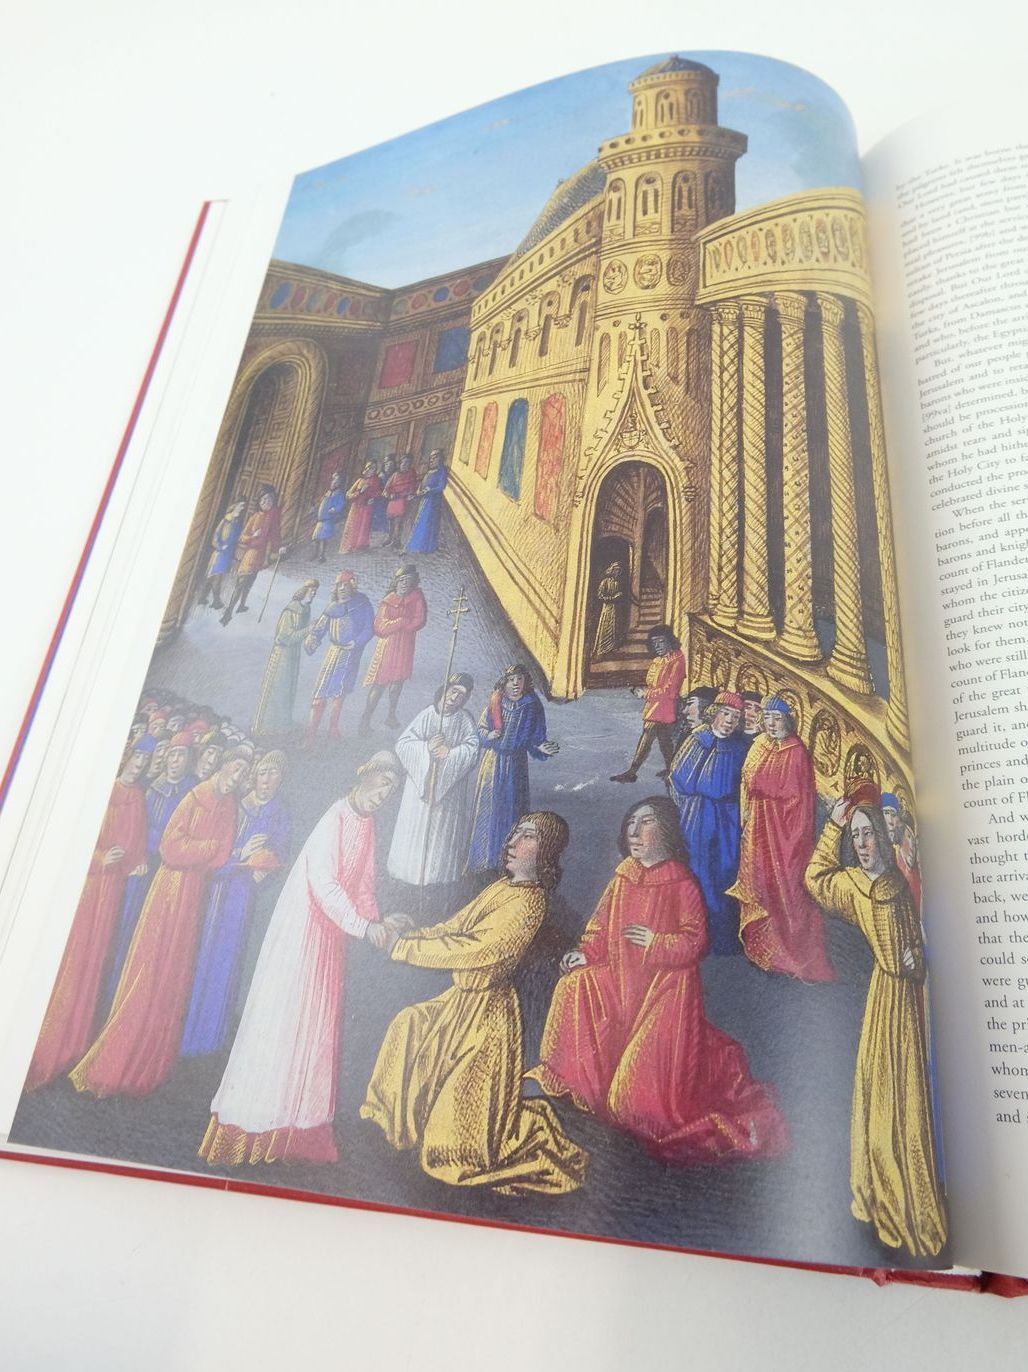 Photo of A CHRONICLE OF THE CRUSADES (2 VOLUMES) written by Mamerot, Sebastien
Delcourt, Thierry
Queruel, Danielle
Masanes, Fabrice illustrated by Colombe, Jean published by Taschen (STOCK CODE: 1821637)  for sale by Stella & Rose's Books